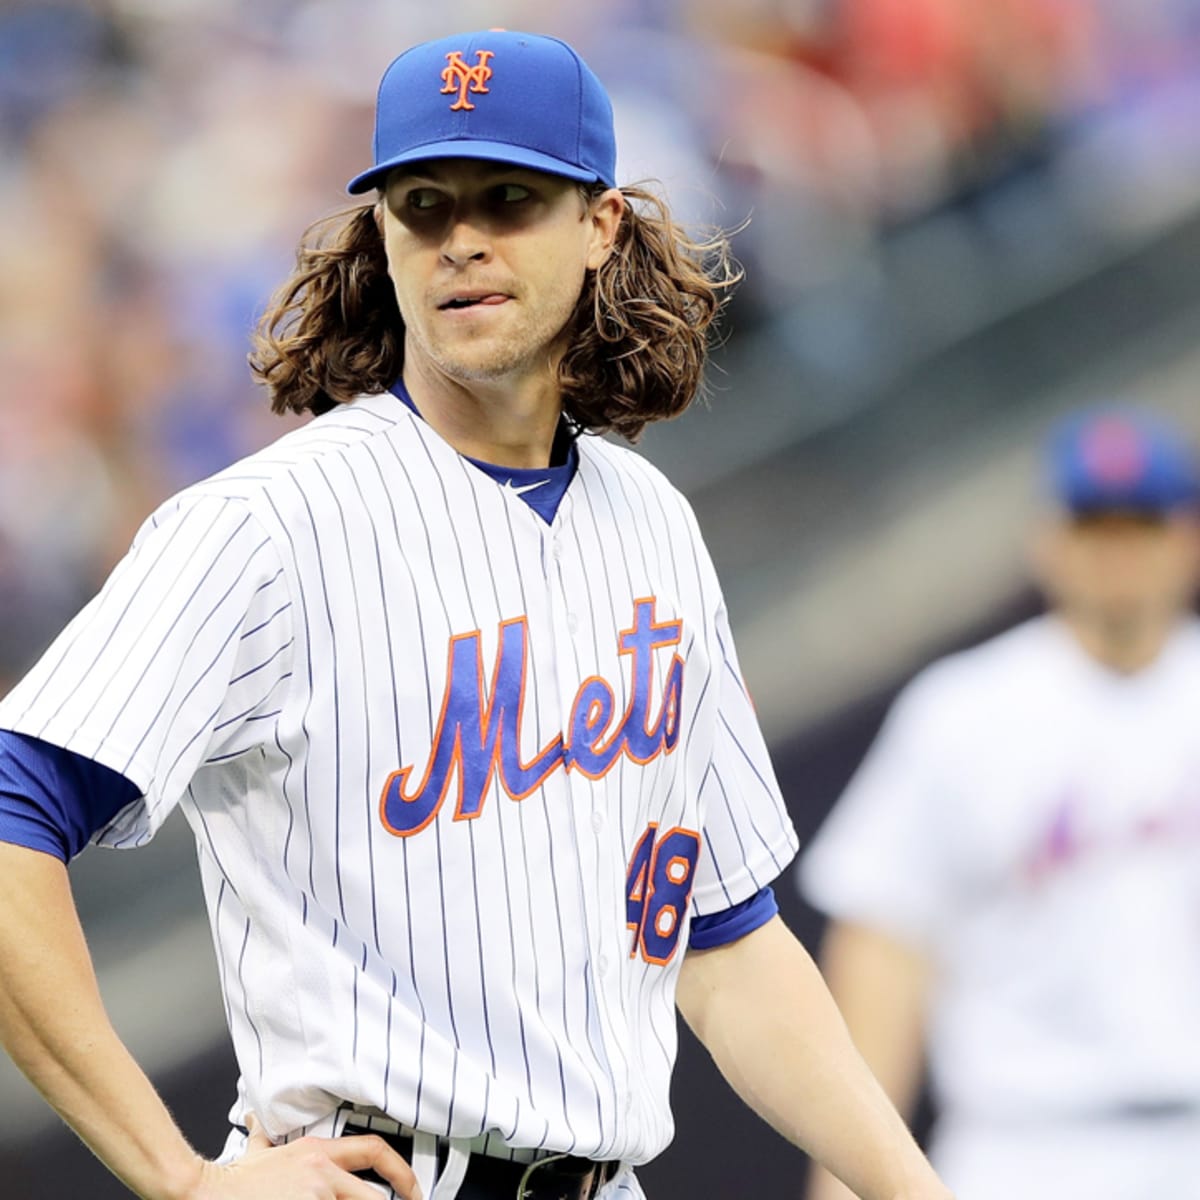 Jacob deGrom hair hat giveaway comes hours after Mets shutdown - Sports  Illustrated